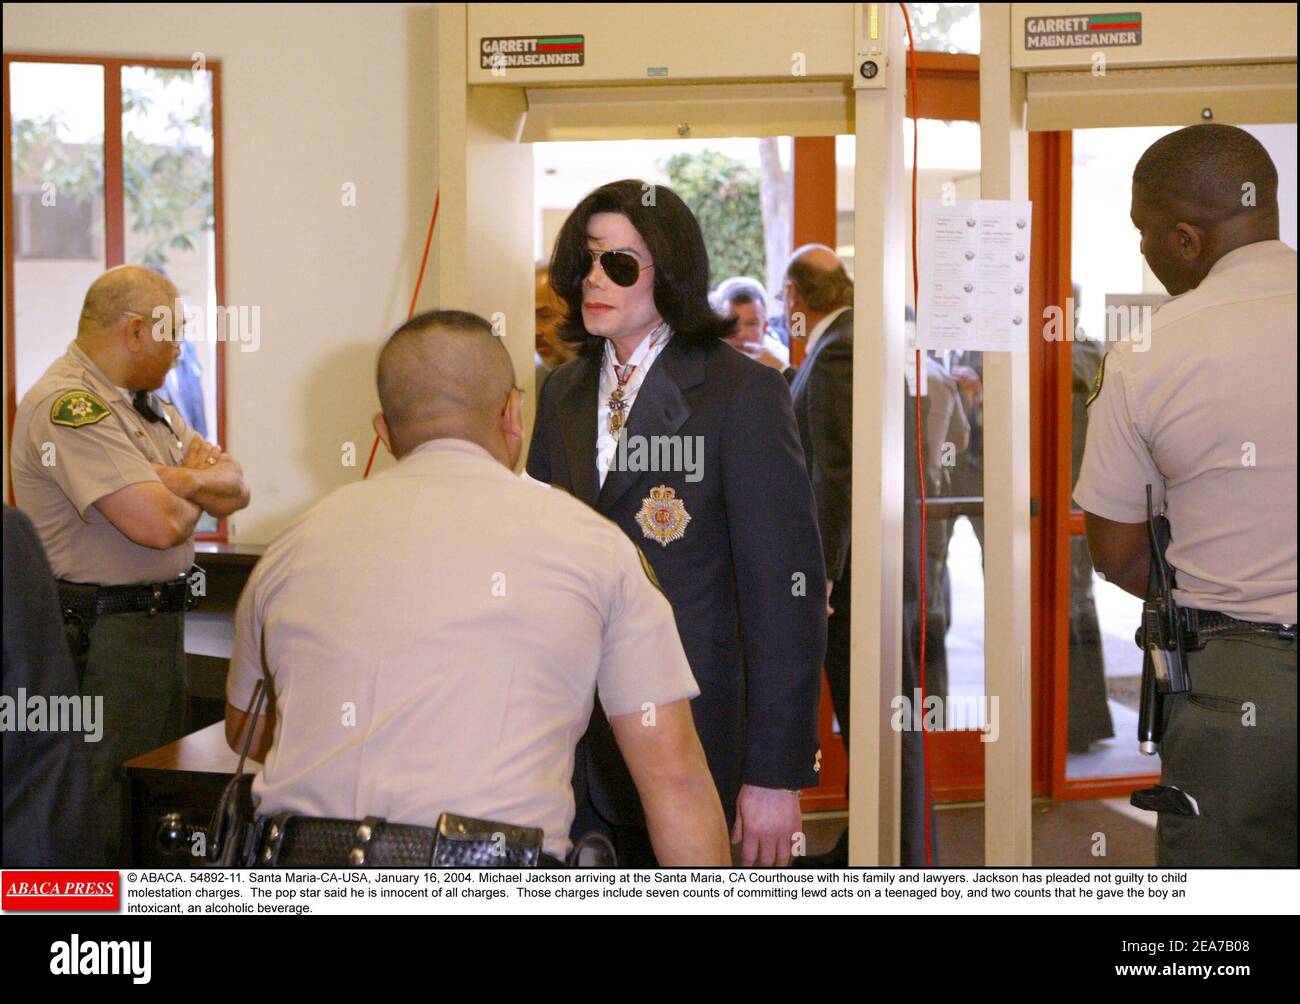 © ABACA. 54892-11. Santa Maria-CA-USA, January 16, 2004. Michael Jackson arriving at the Santa Maria, CA Courthouse with his family and lawyers. Jackson has pleaded not guilty to child molestation charges. The pop star said he is innocent of all charges. Those charges include seven counts of committing lewd acts on a teenaged boy, and two counts that he gave the boy an intoxicant, an alcoholic beverage. Stock Photo